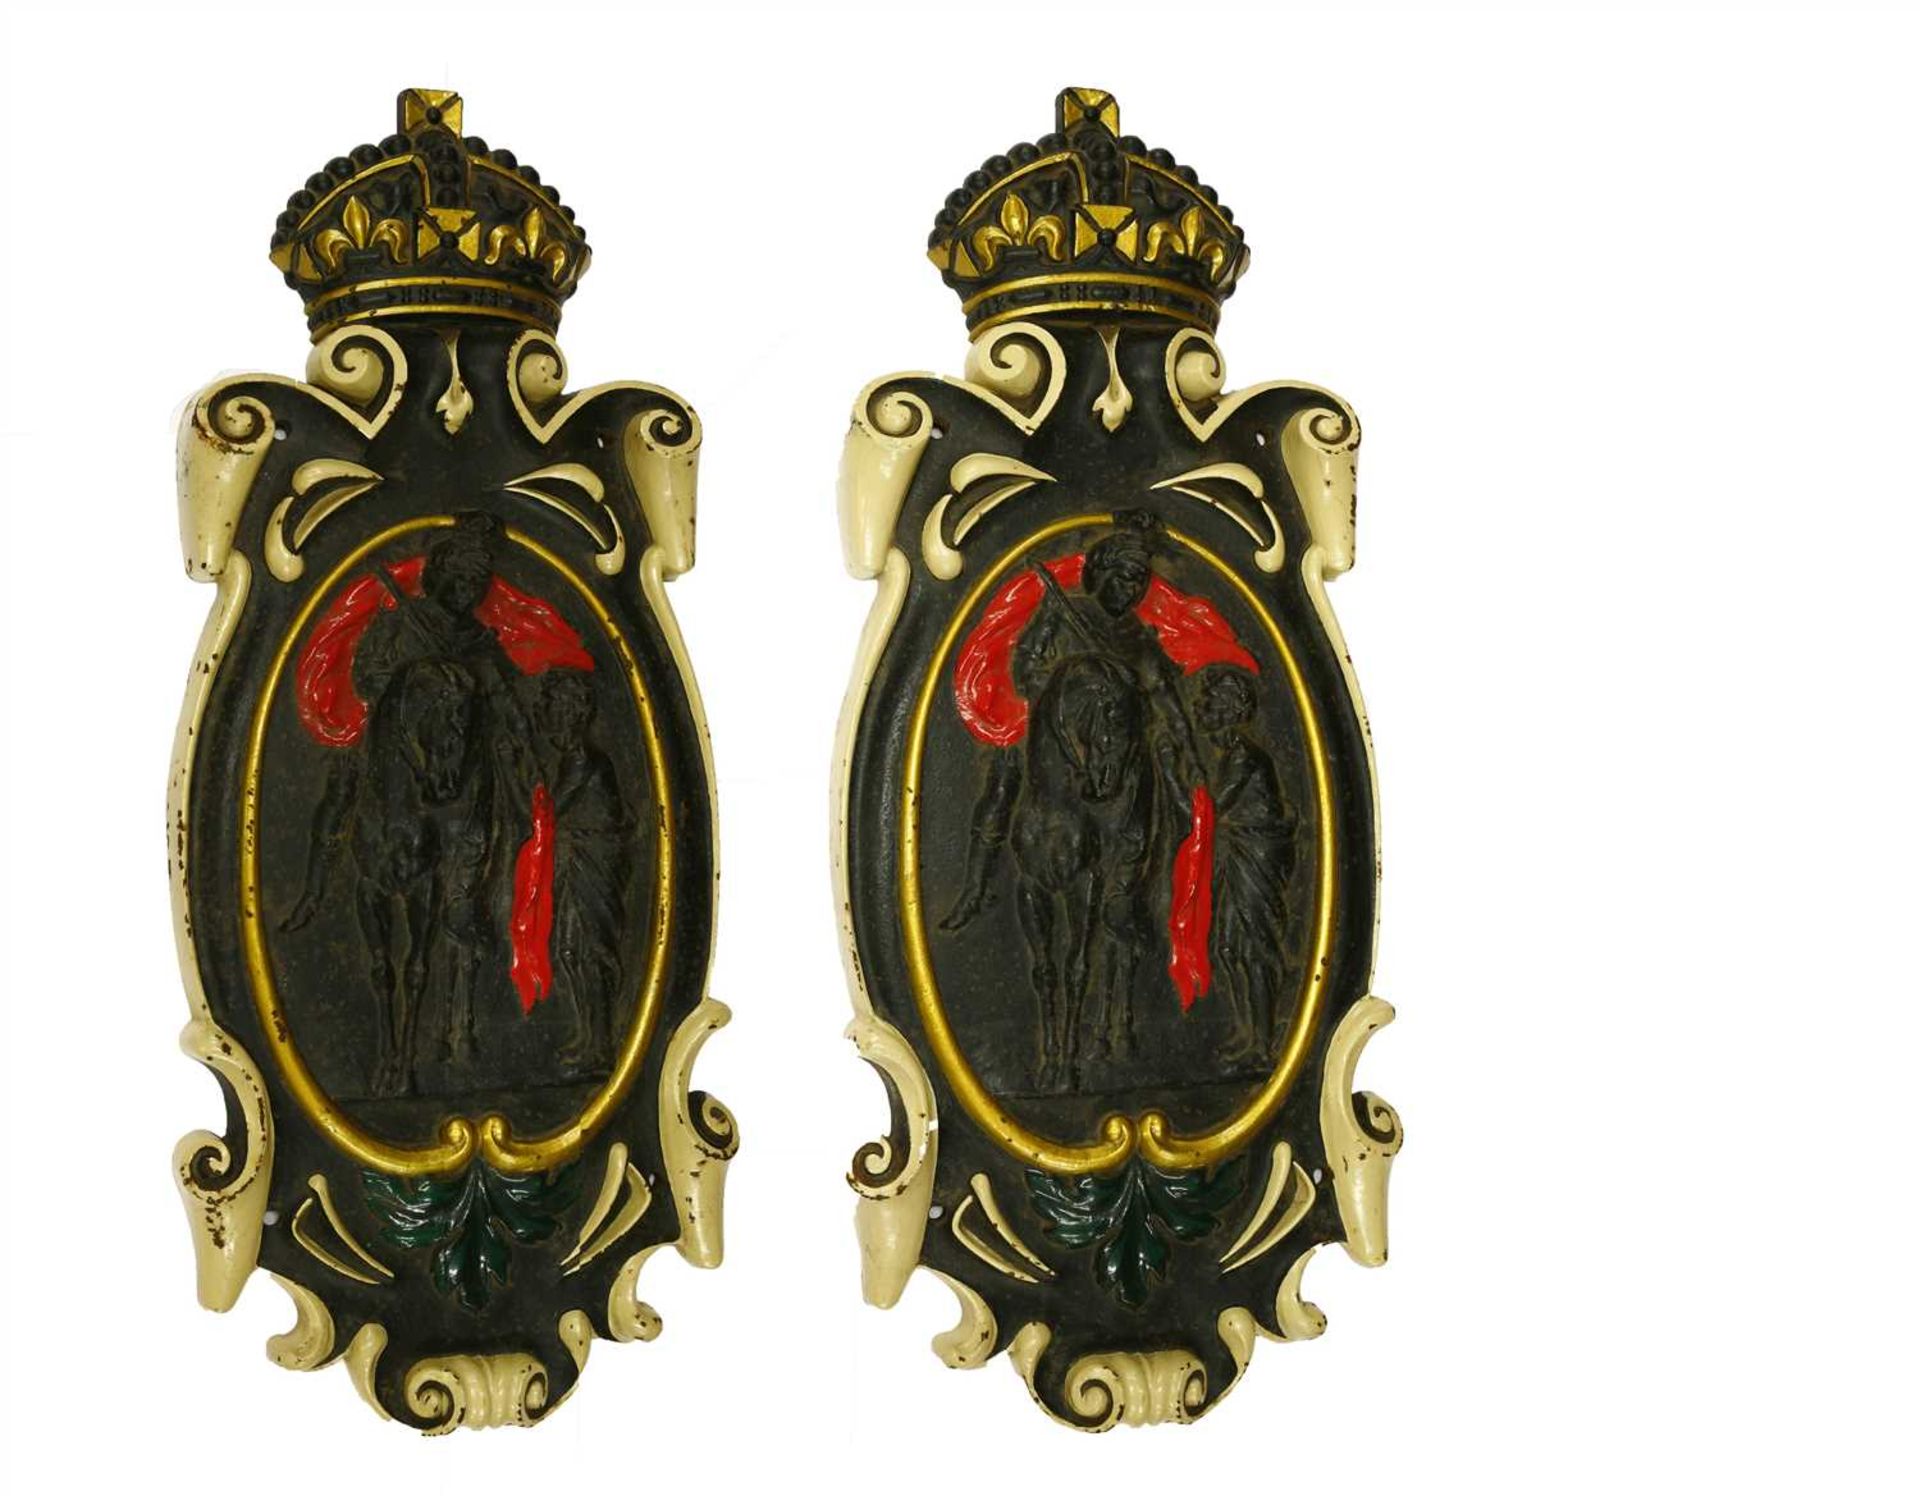 A PAIR OF MARTIN-IN-THE-FIELDS CAST IRON CHURCH PLAQUES,